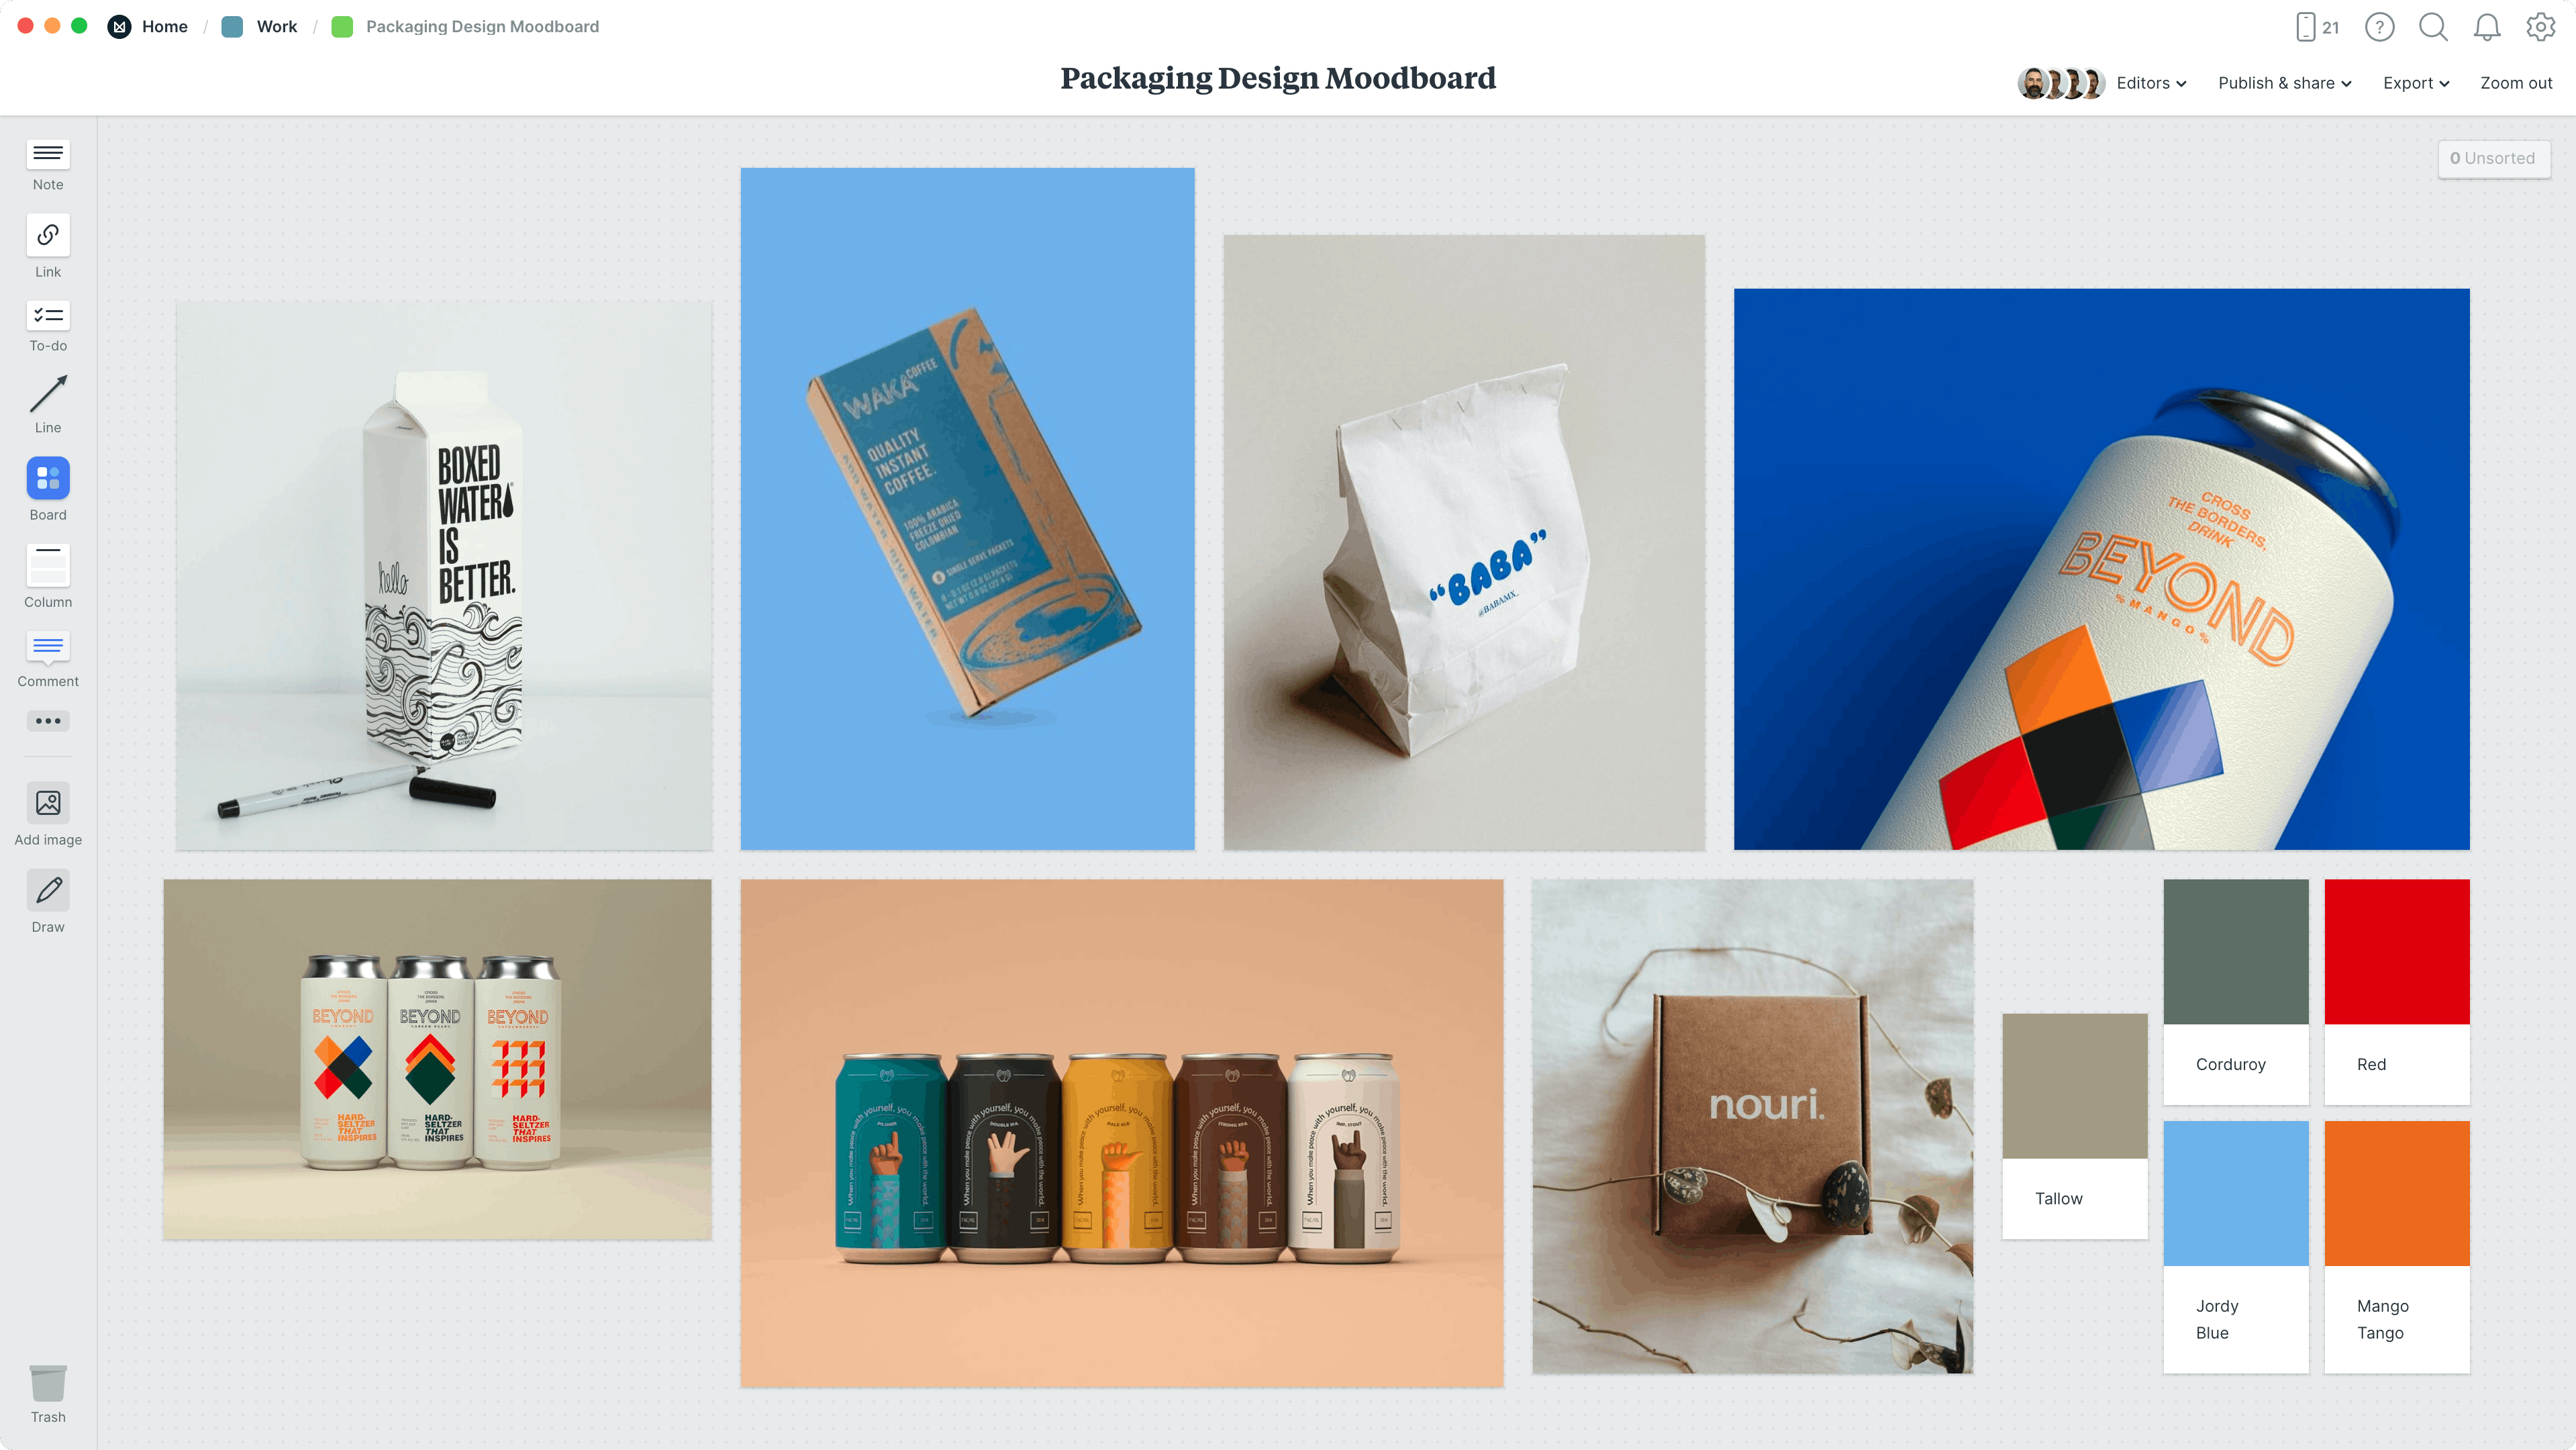 Packaging design moodboard example